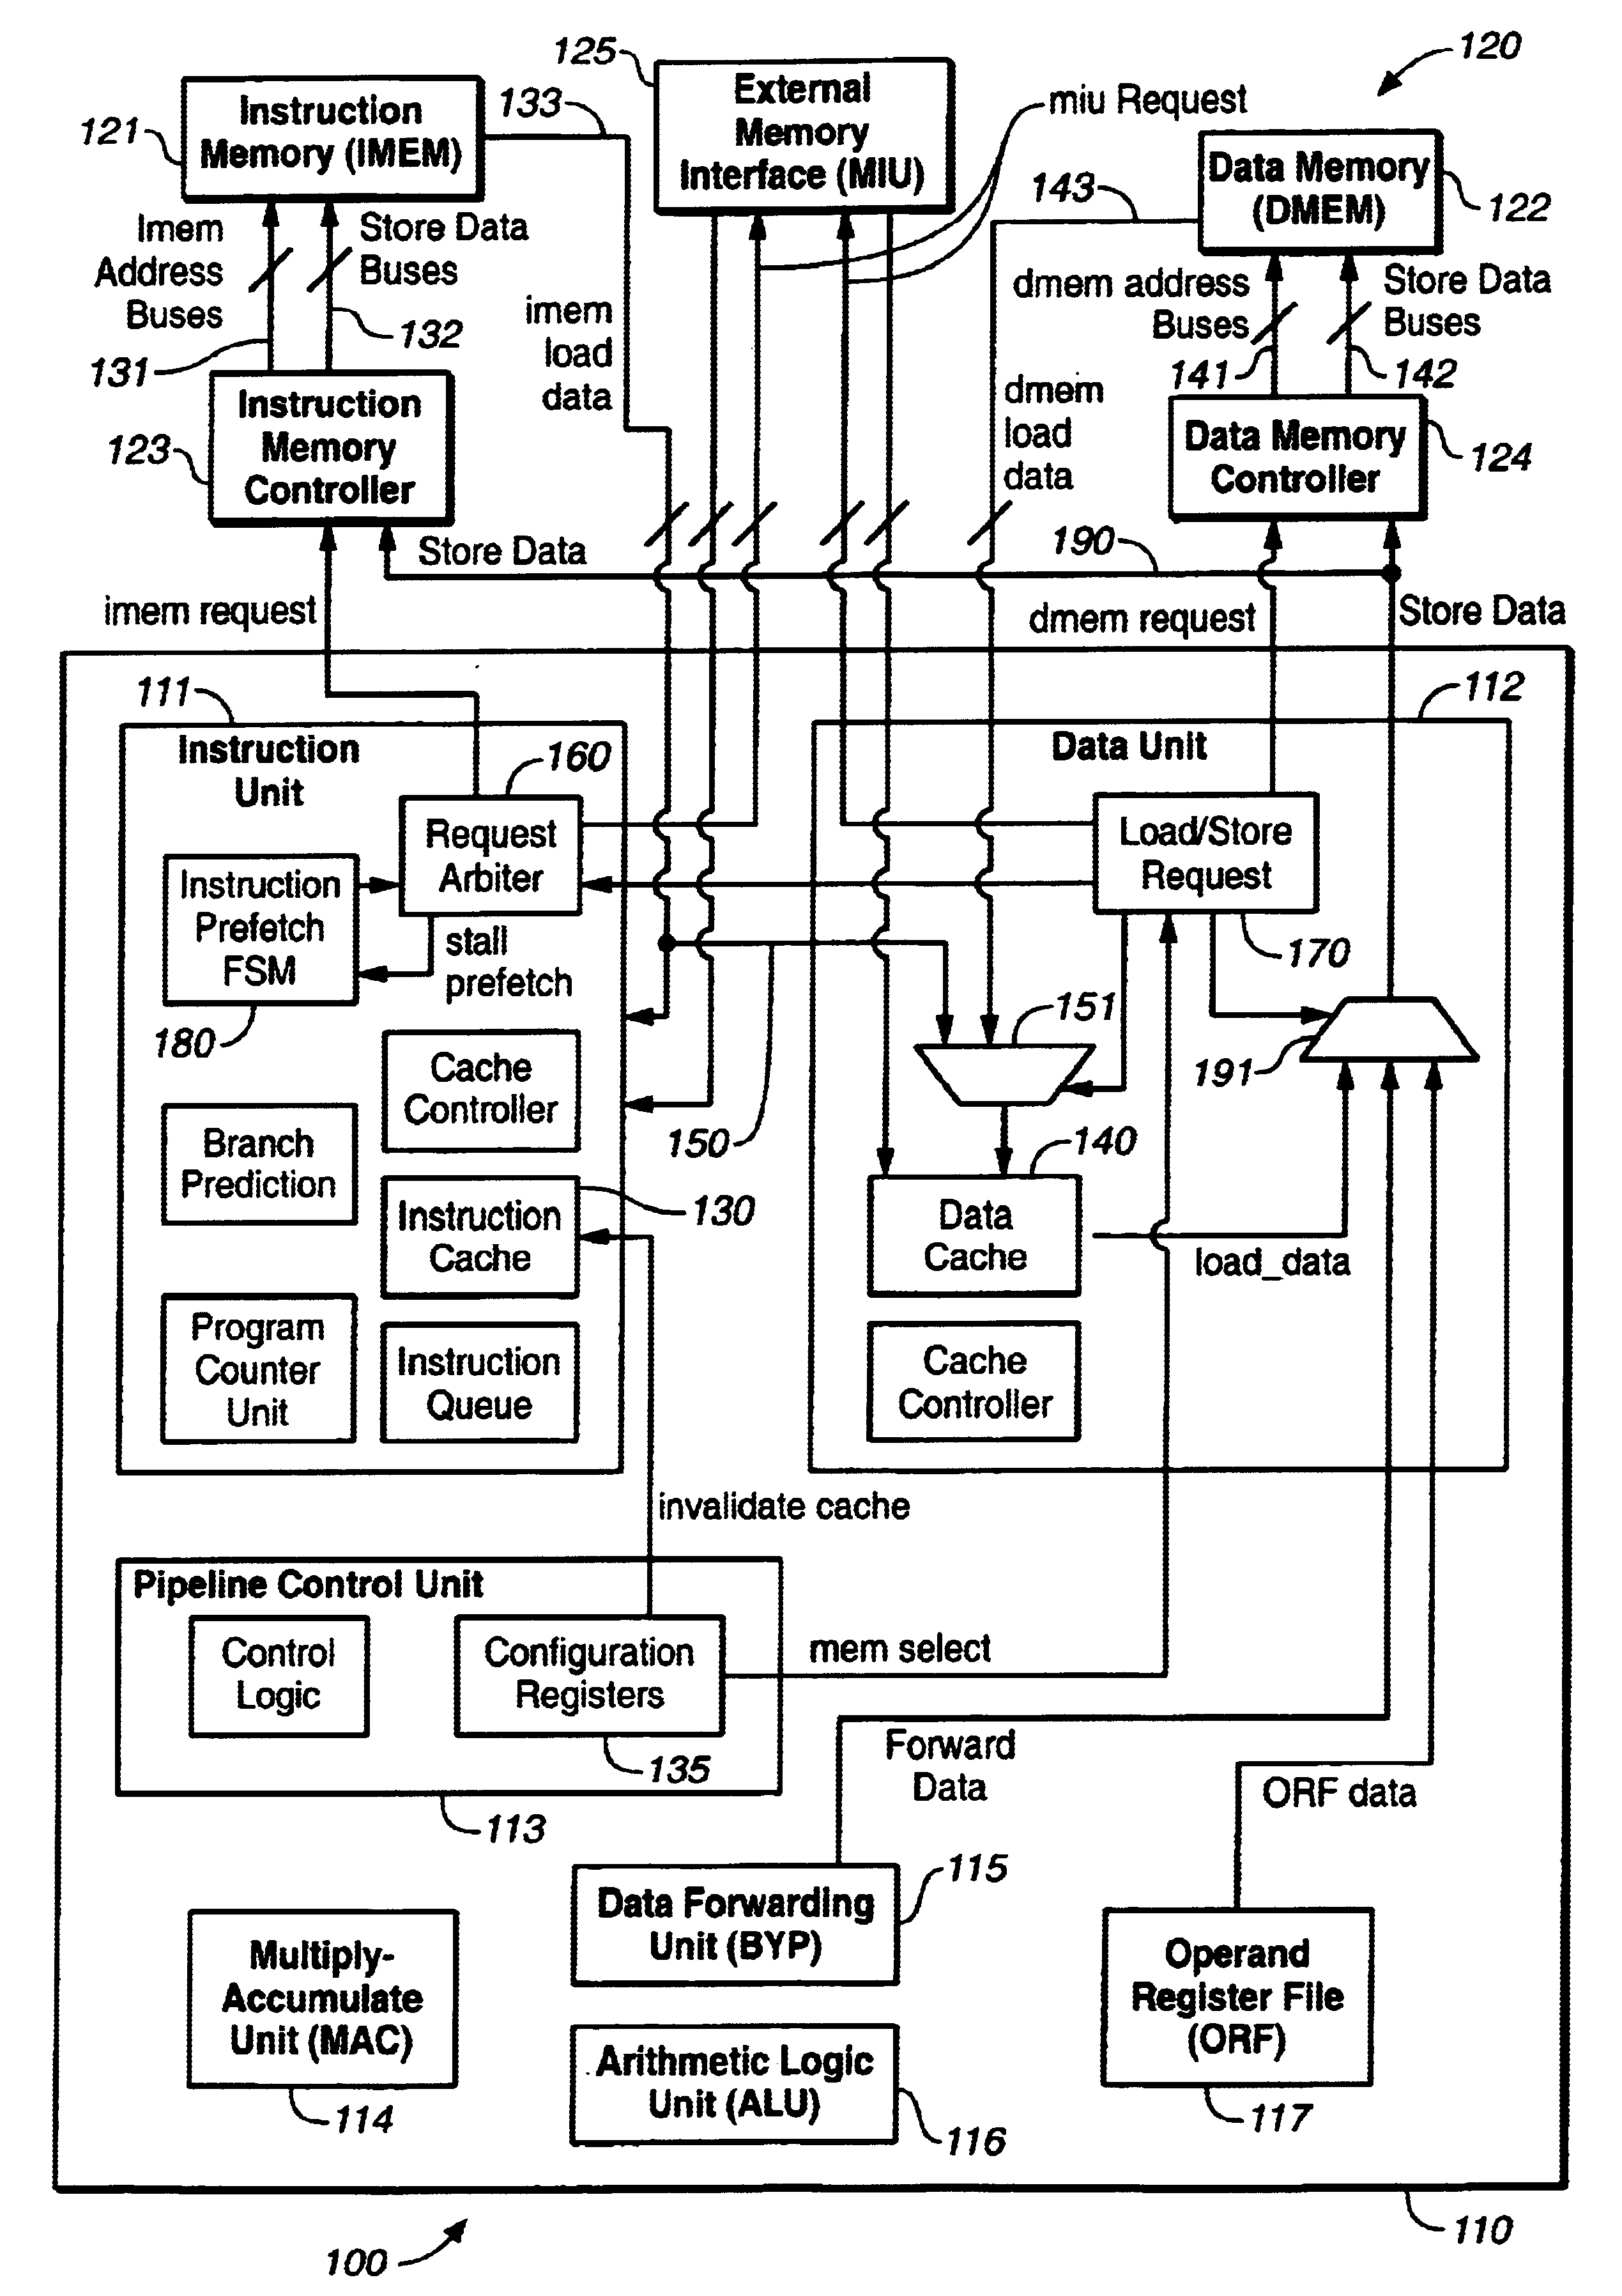 Mechanism for supporting self-modifying code in a harvard architecture digital signal processor and method of operation thereof